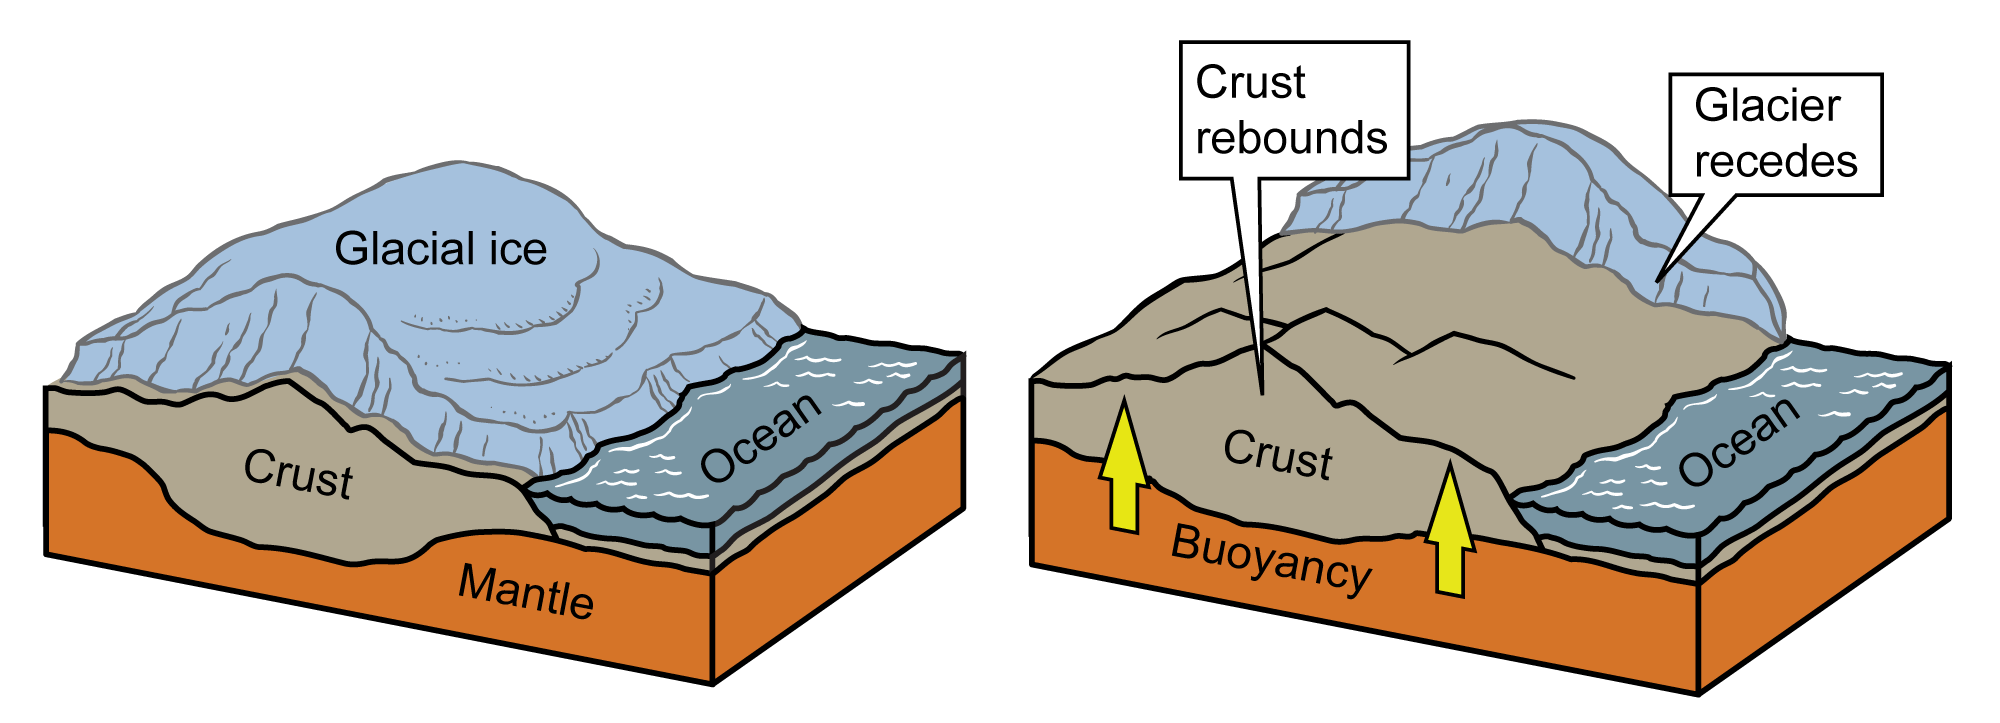 Simple illustration showing the process of isostatic rebound after a glacier melts.